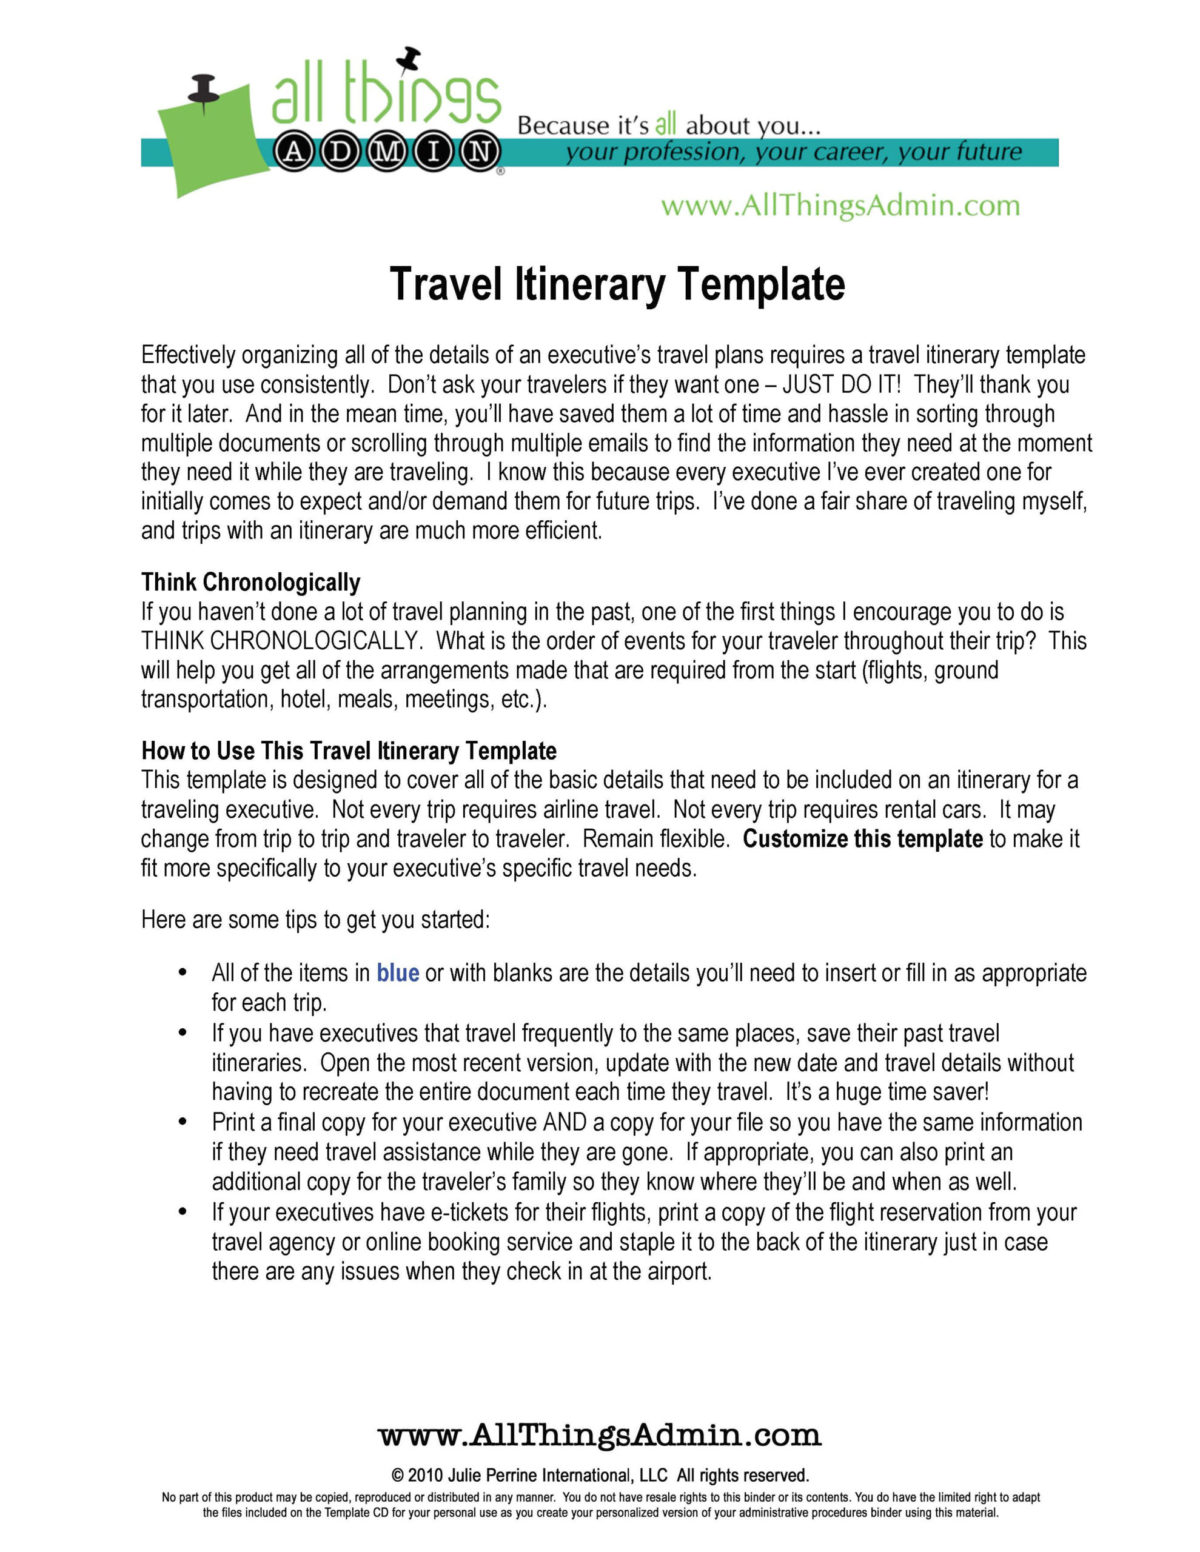 Basic Flight Itinerary Template Pdf Format | E Database Intended For Executive Assistant Travel Itinerary Template